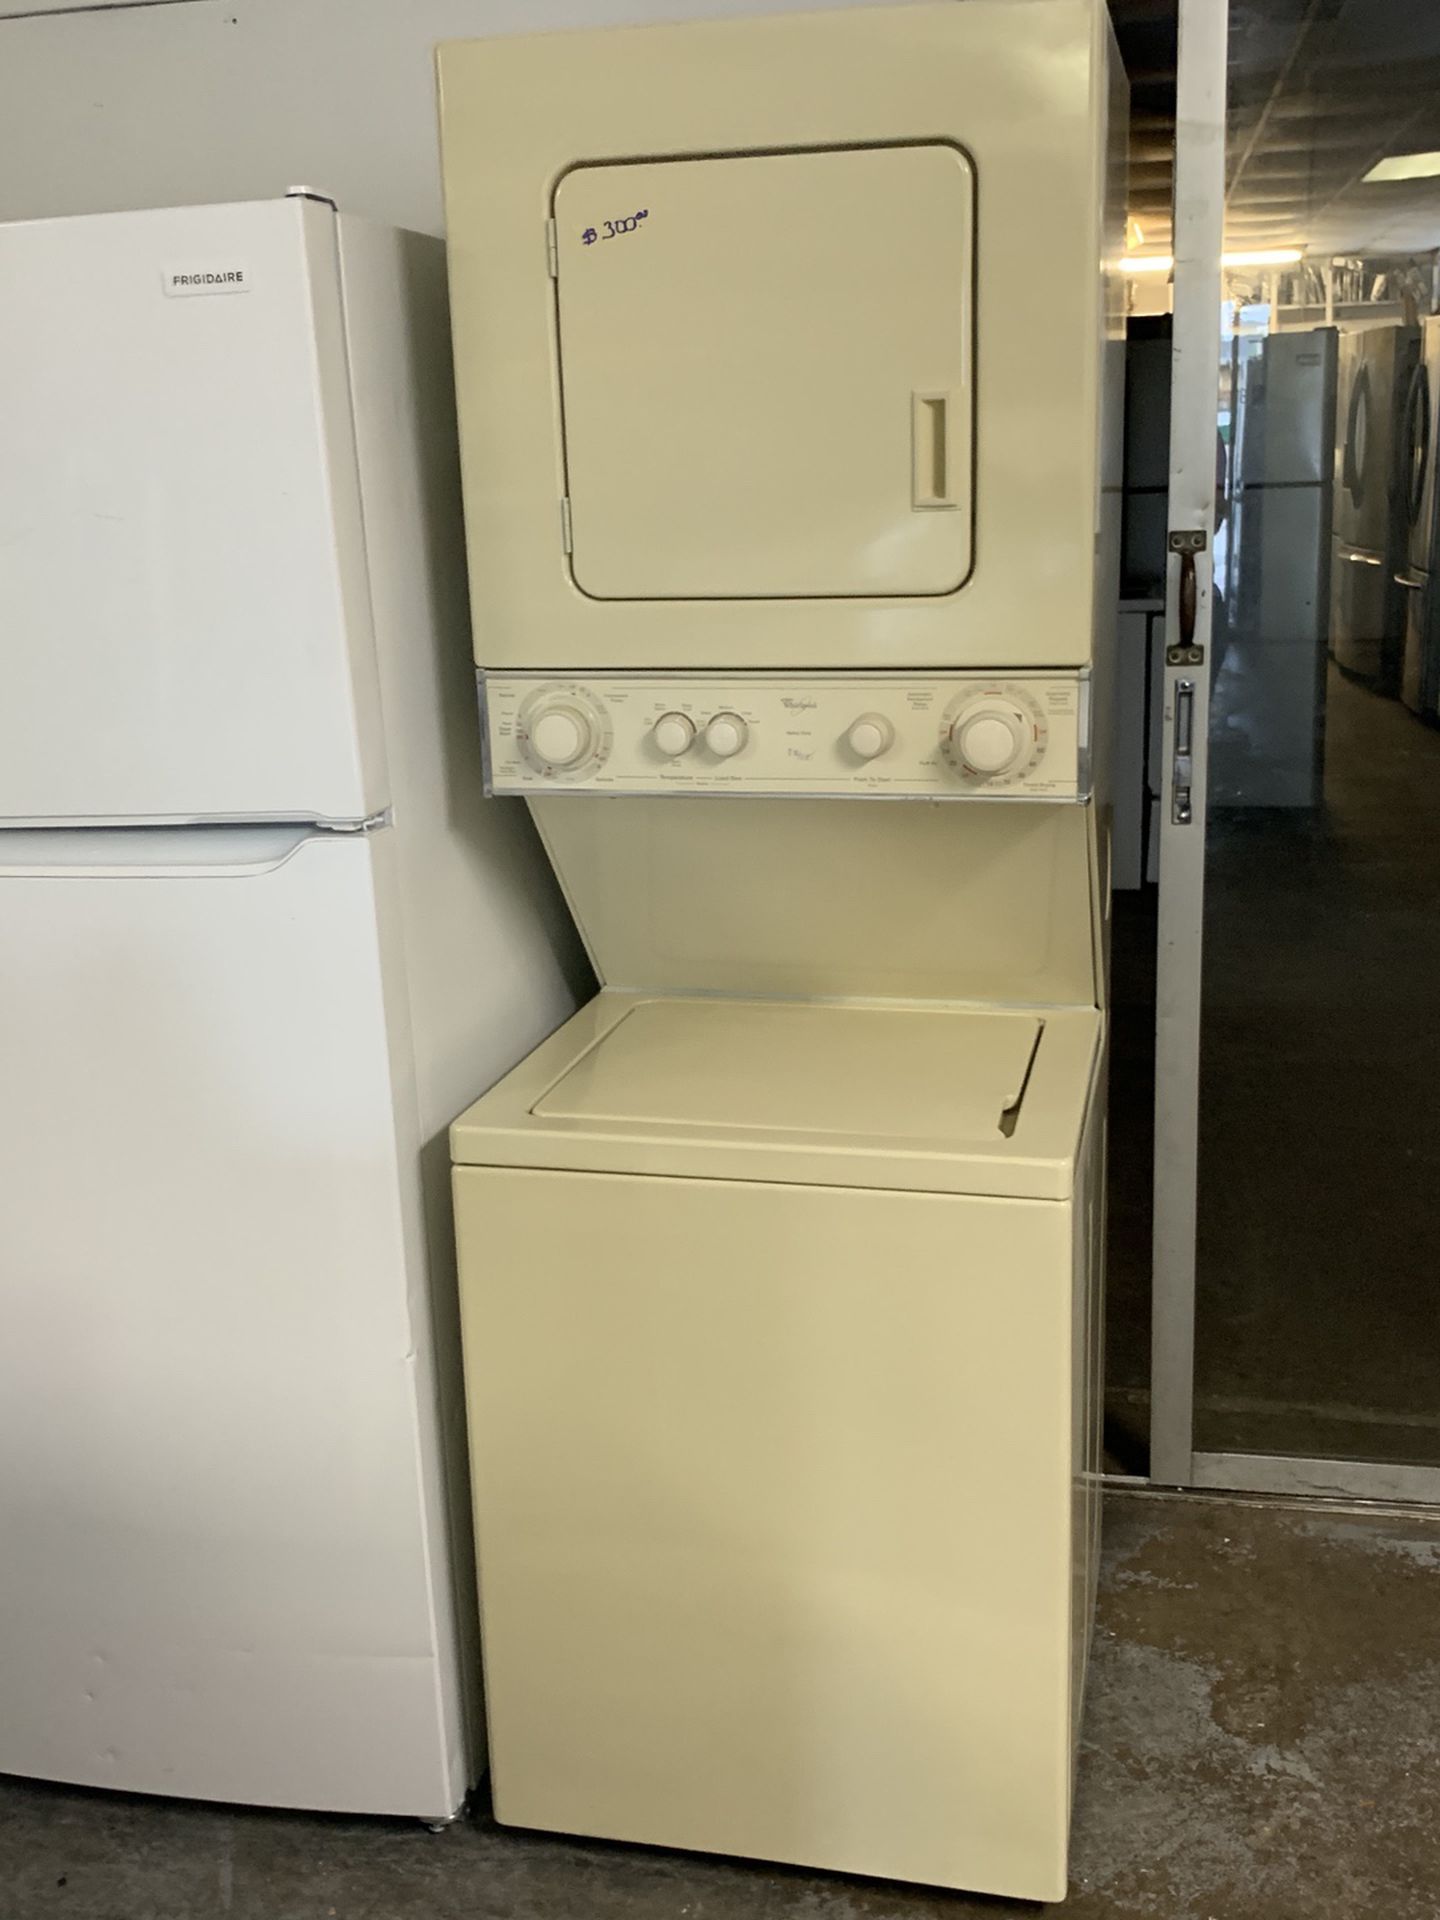 24” Stack Used (washer/dryer)